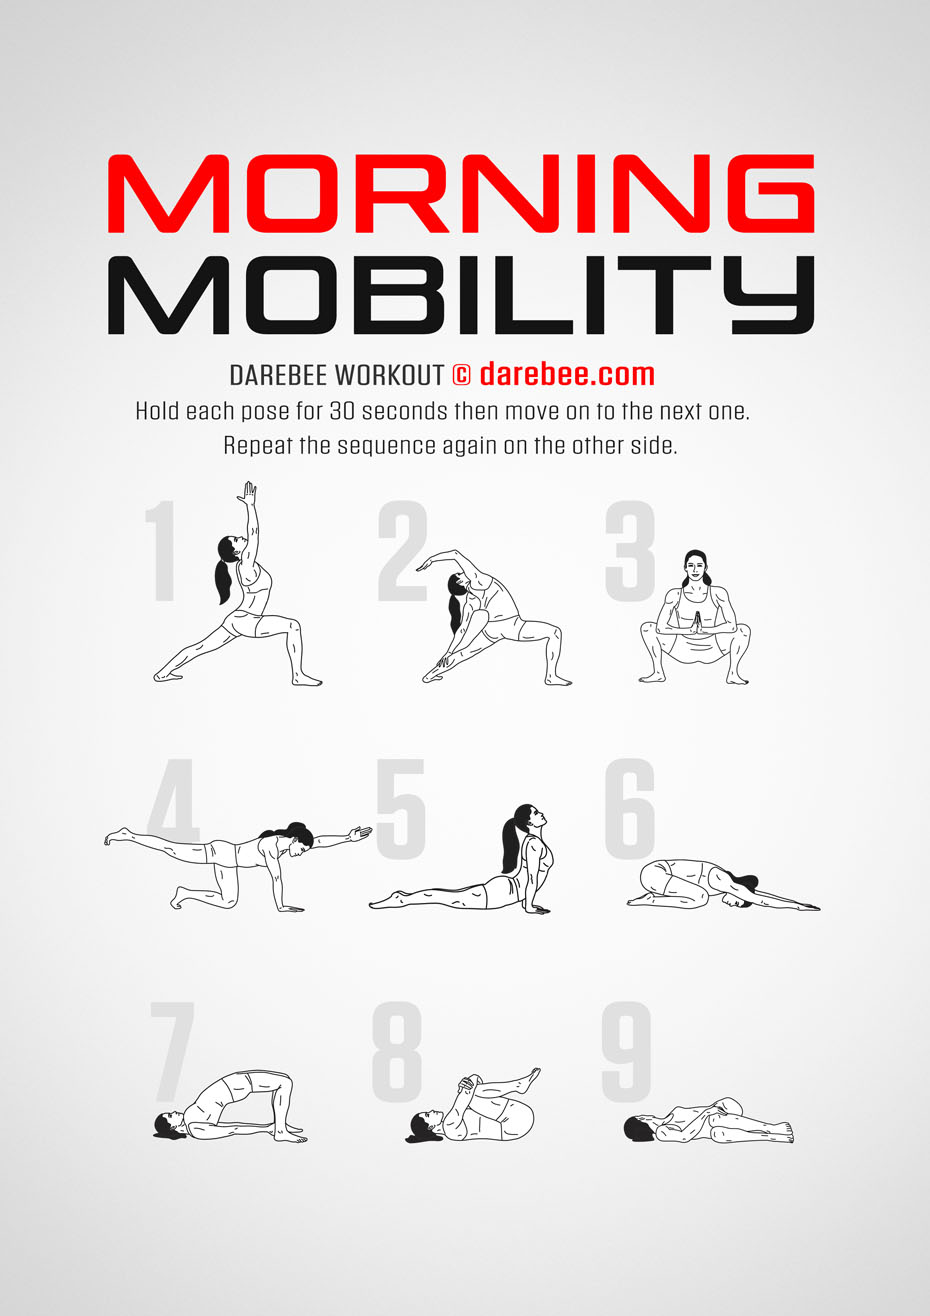 Morning Mobility is a Darebee home fitness workout you could do in the morning to help you feel energetic and agile.